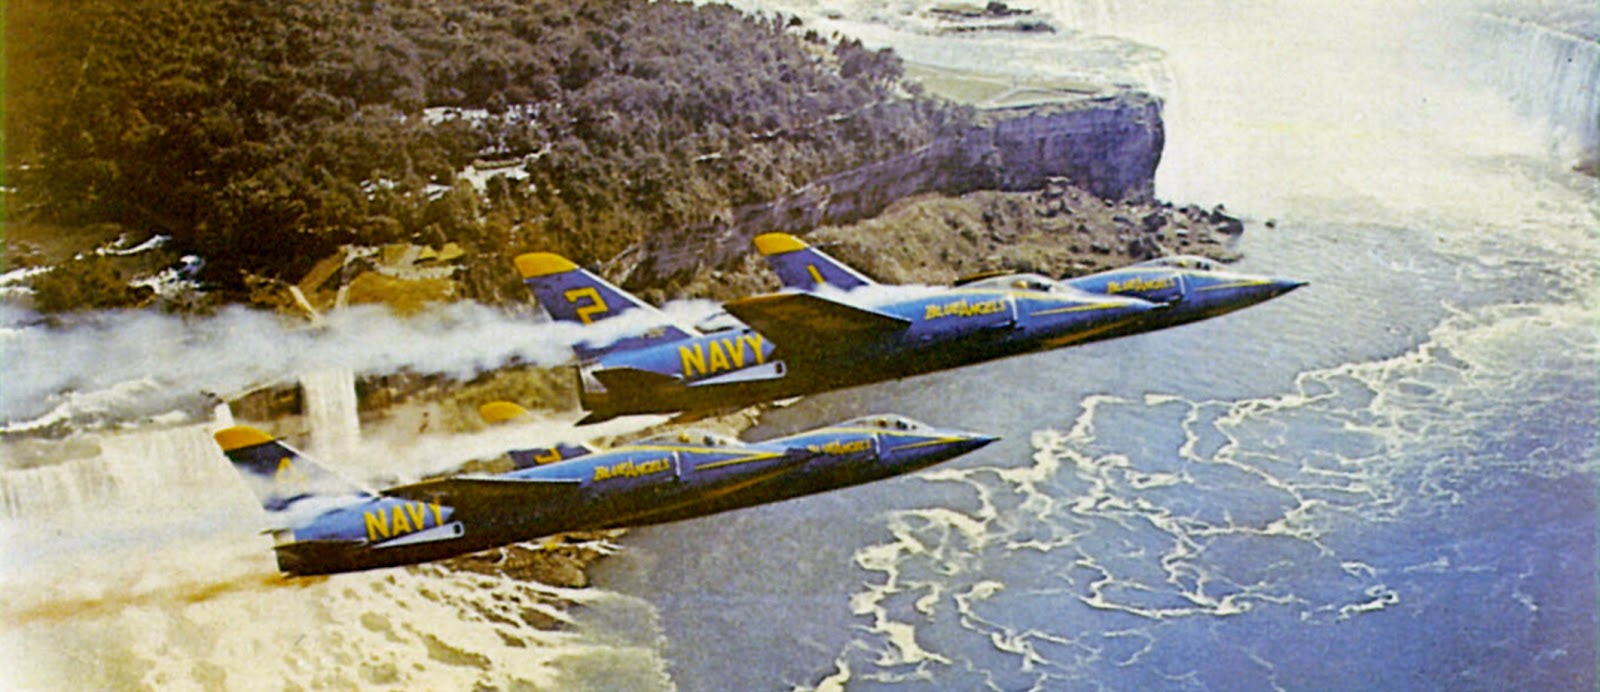 Ultimate Collection Of Rare Historical Photos. A Big Piece Of History (200 Pictures) - Blue Angels